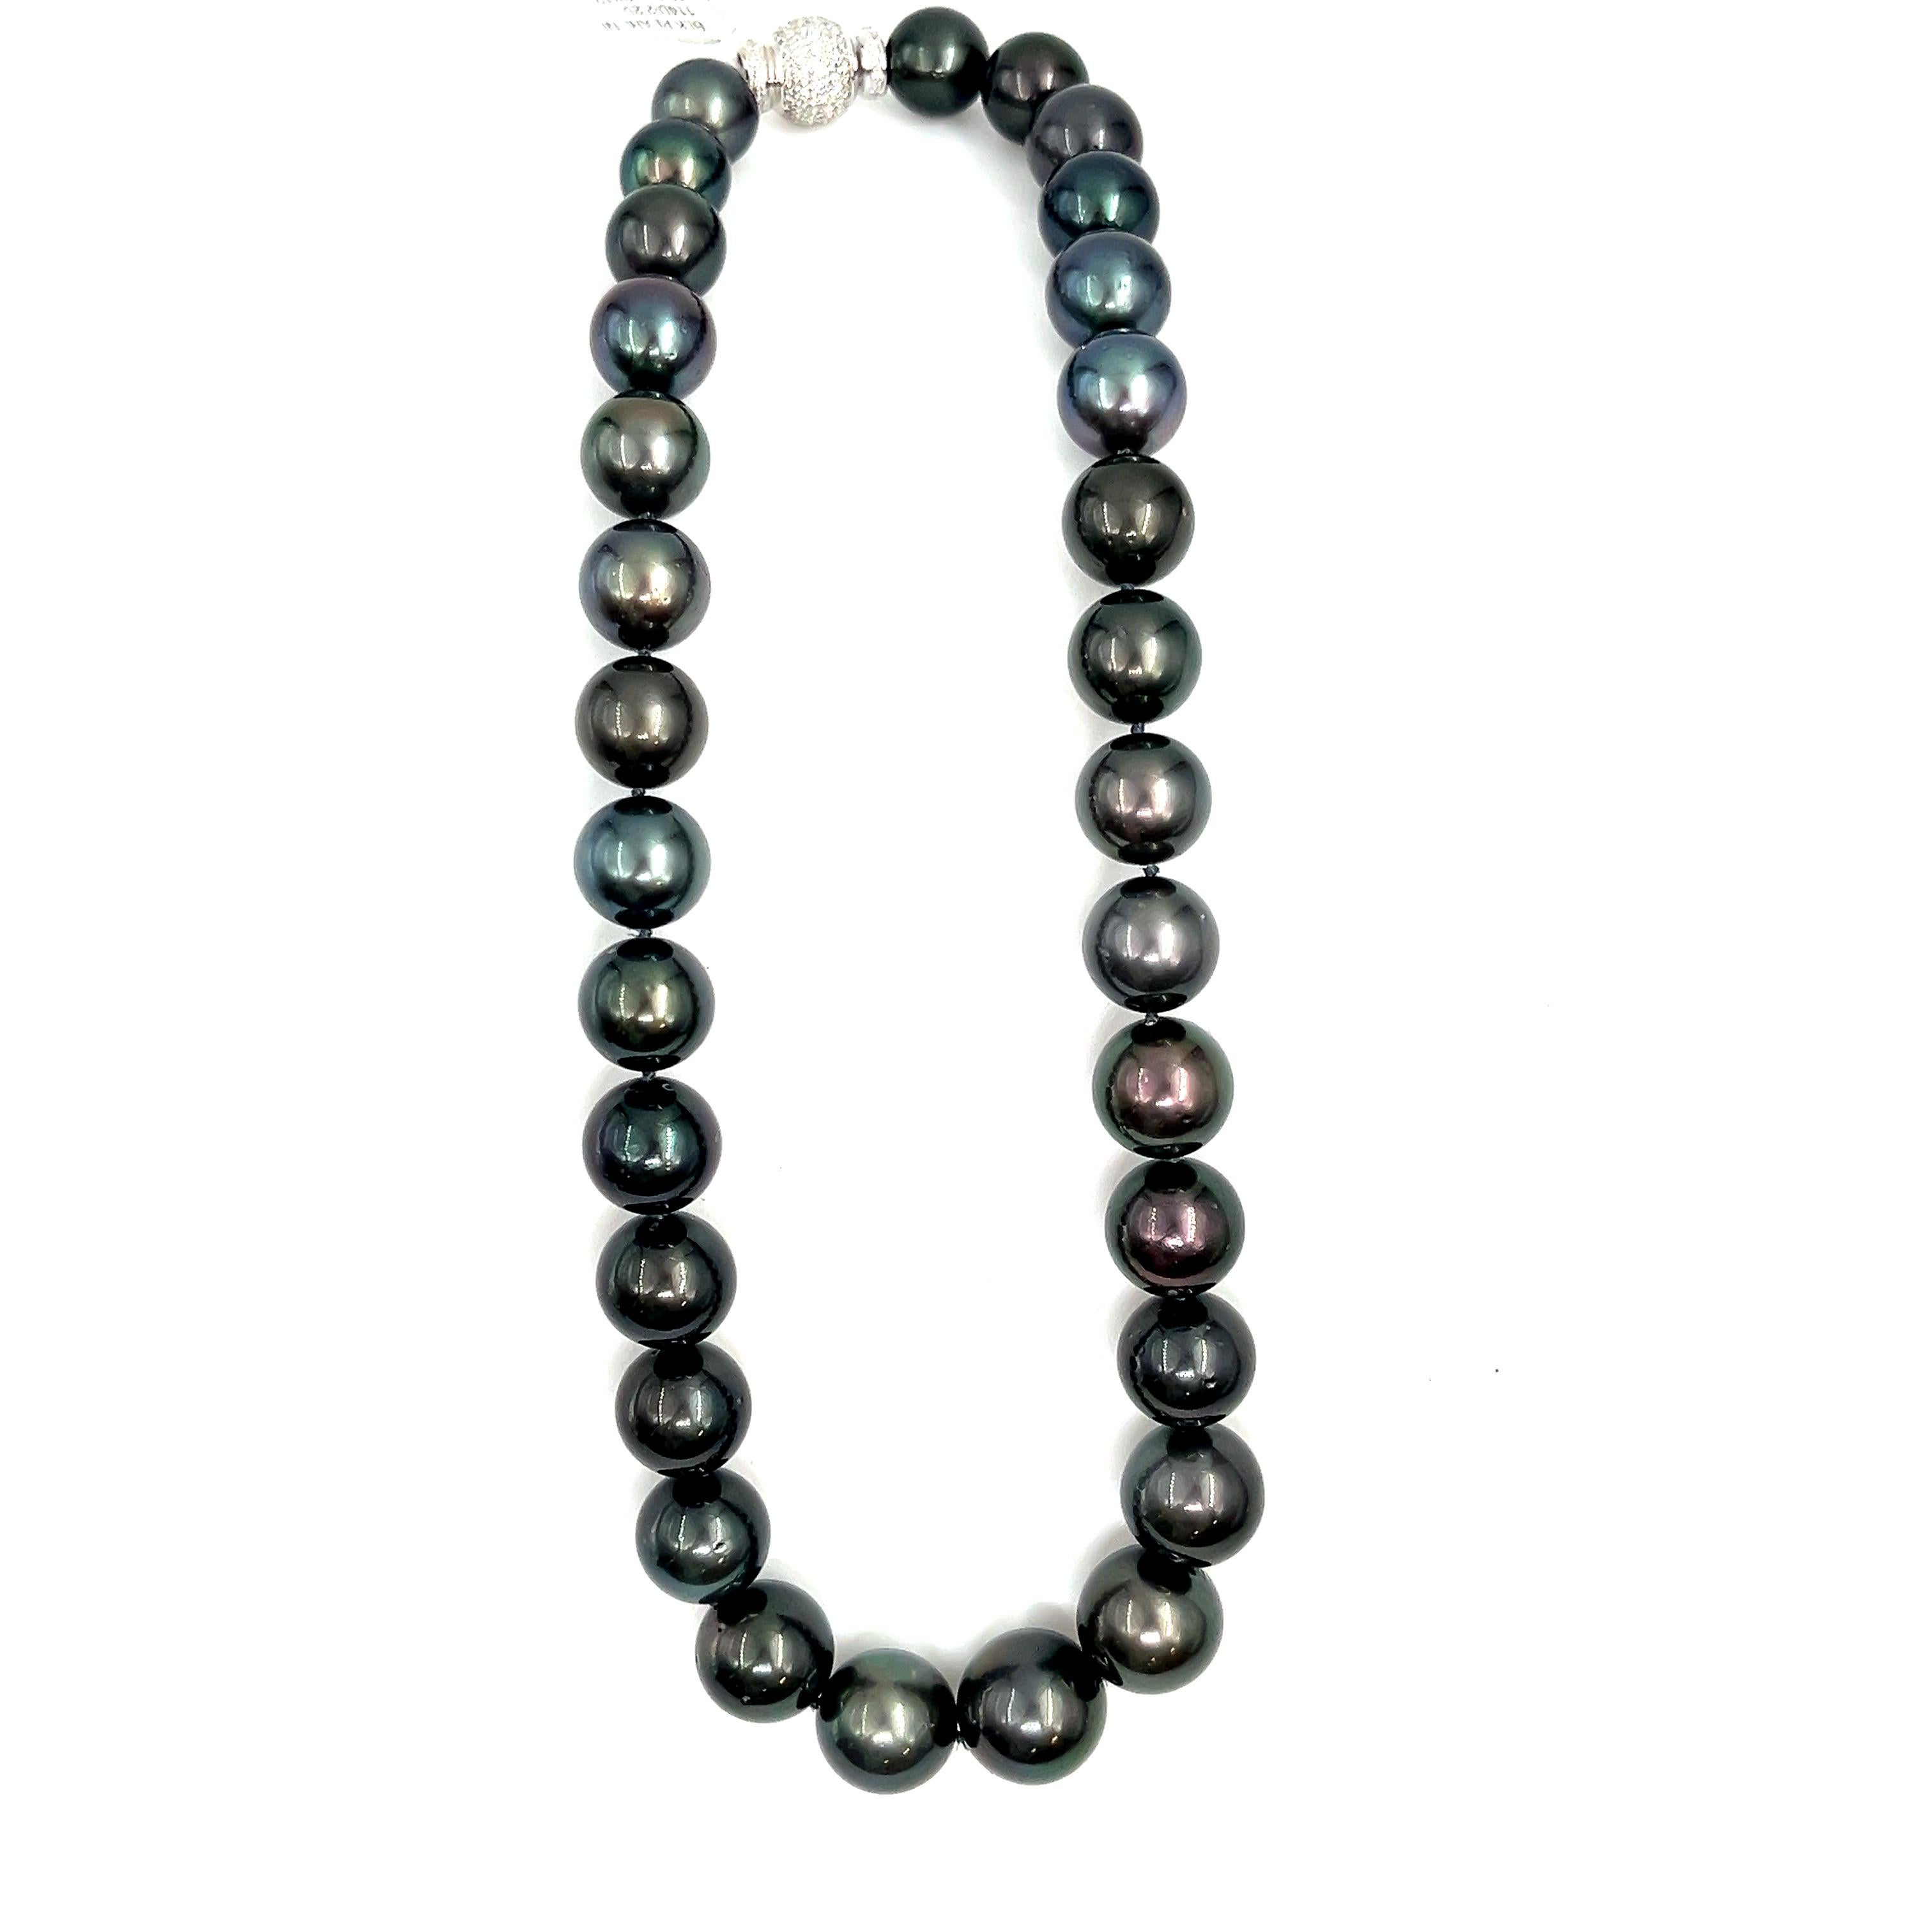 This beautiful black Tahitian pearl necklace ranges from 12 mm to 16.30 mm. The clasp has 114 round brilliant diamonds  weighing 2.25 ct. The diamonds boast a color of E/F, are VS1 in clarity and are set in 18k white gold. A perfect piece for